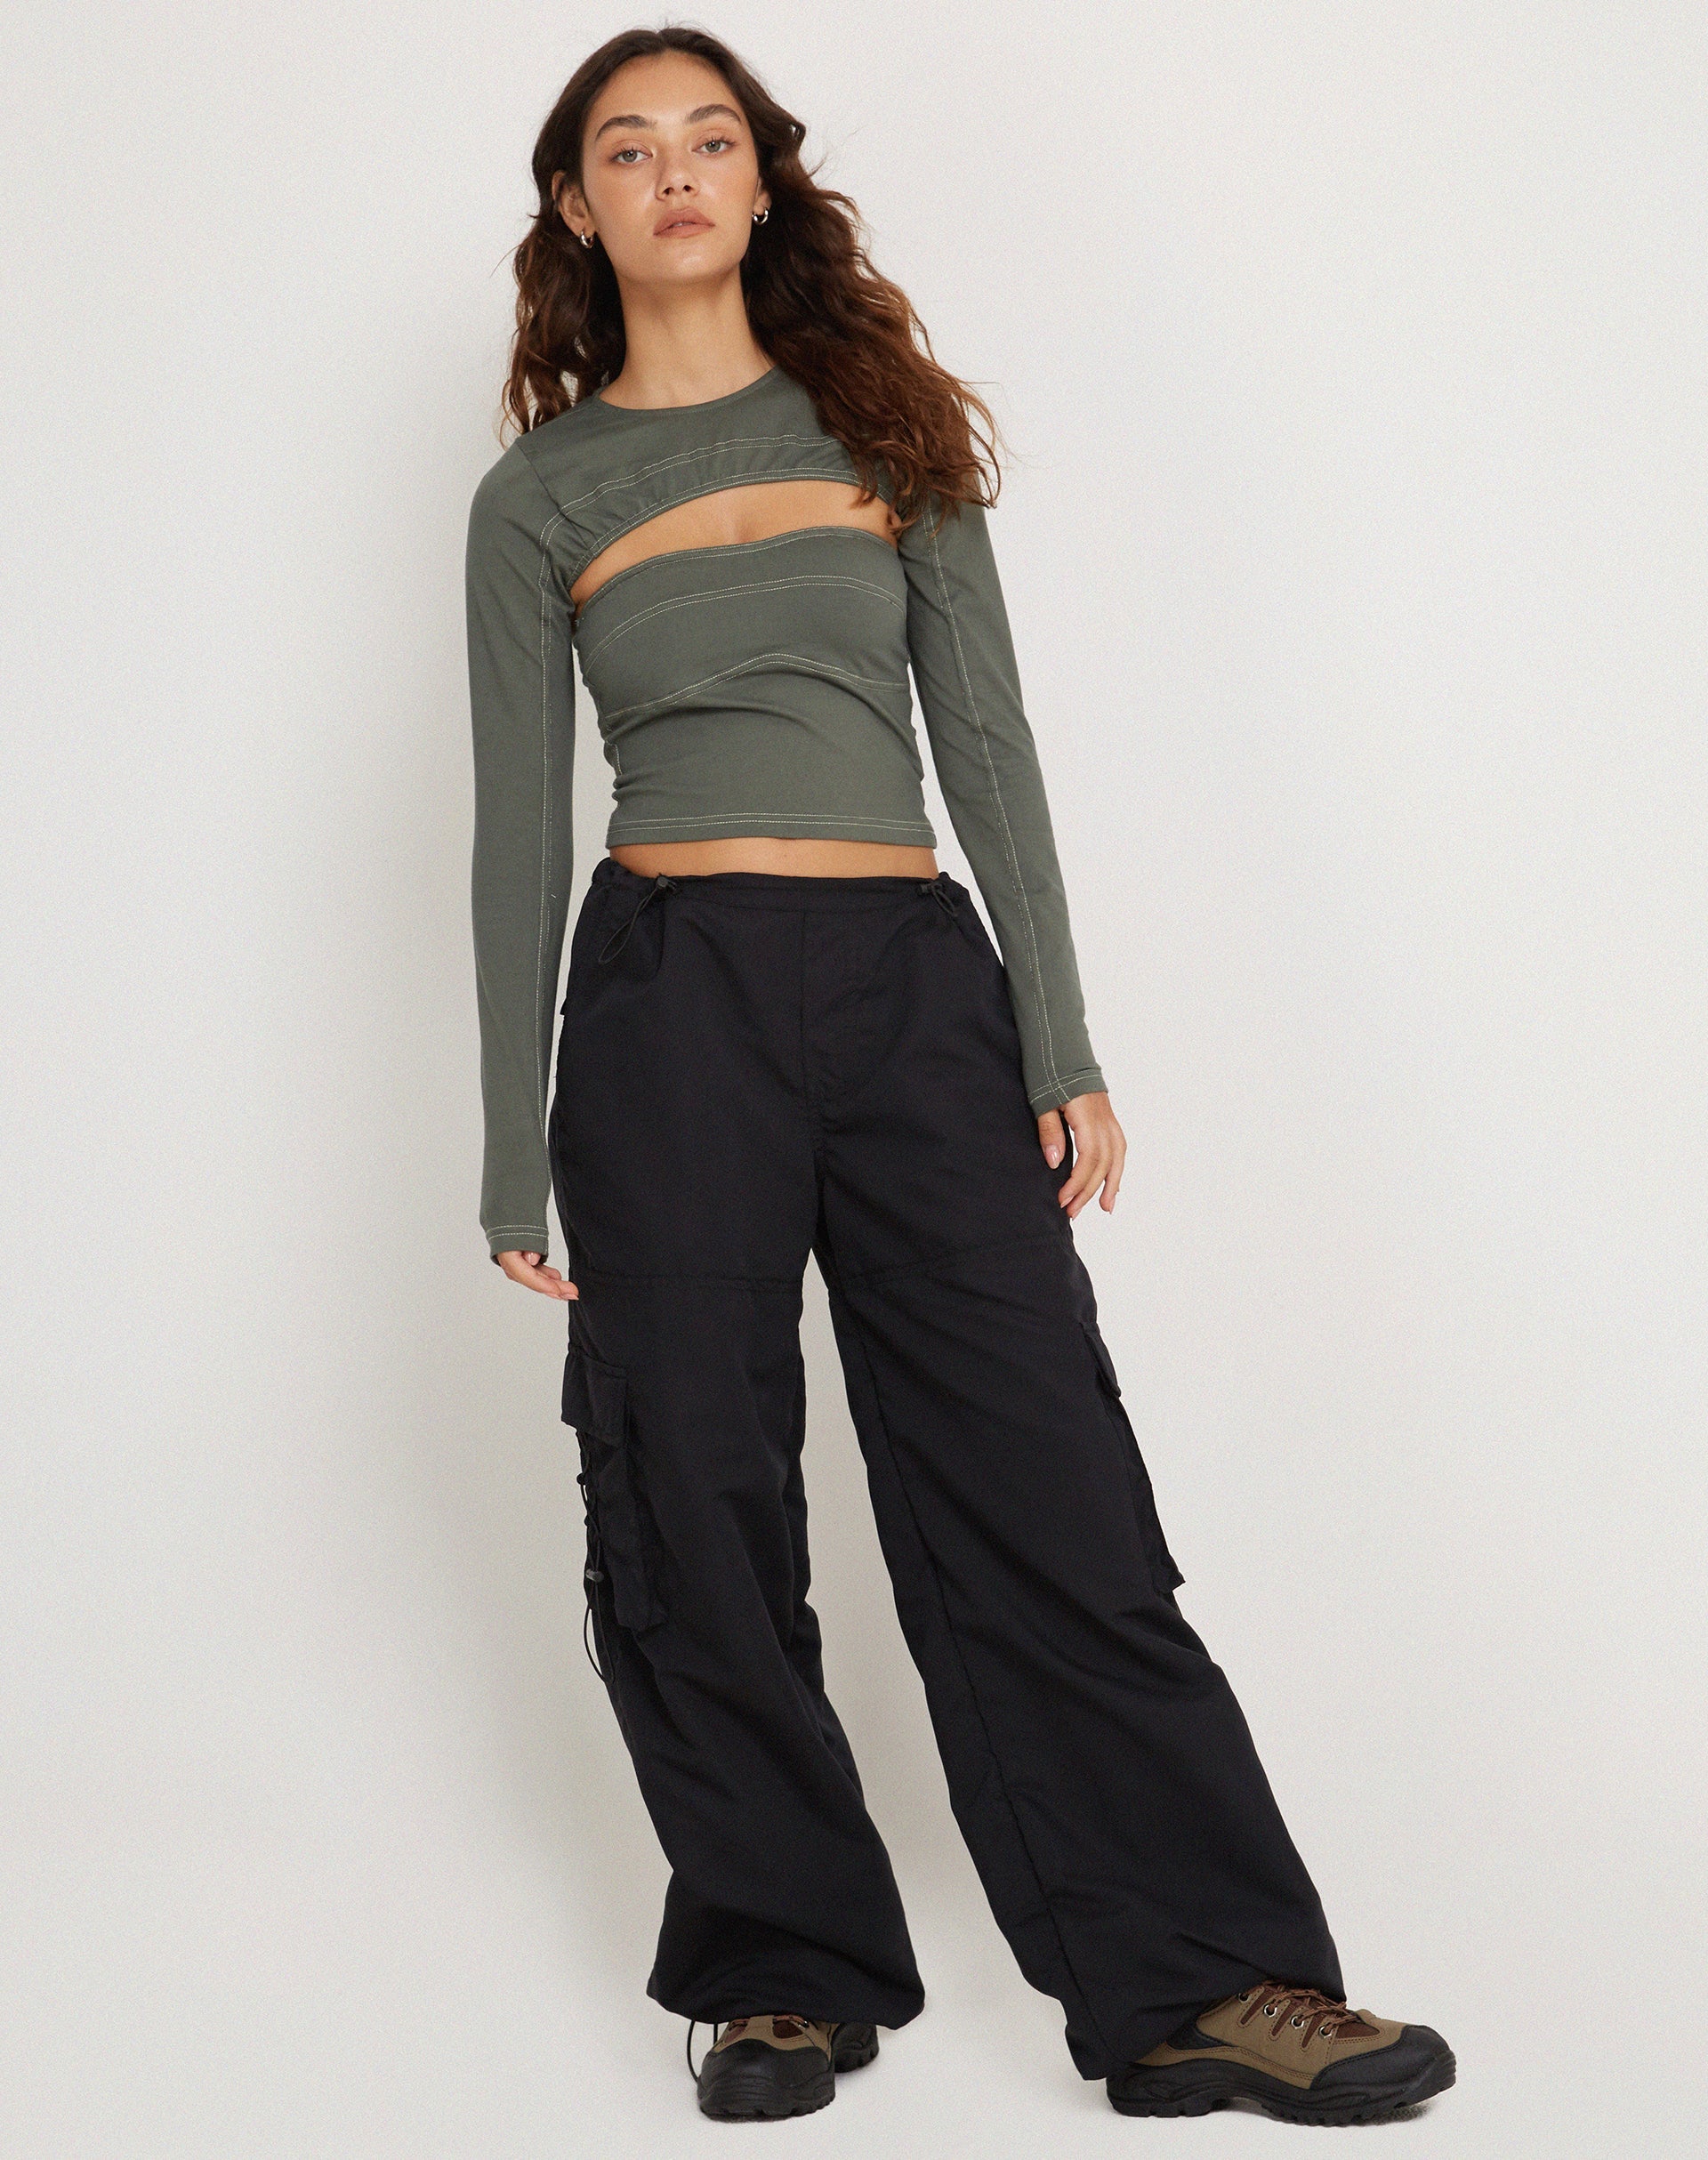 Image of Matea Long Sleeve Crop Top in Duck Green with Yellow Top Stitch